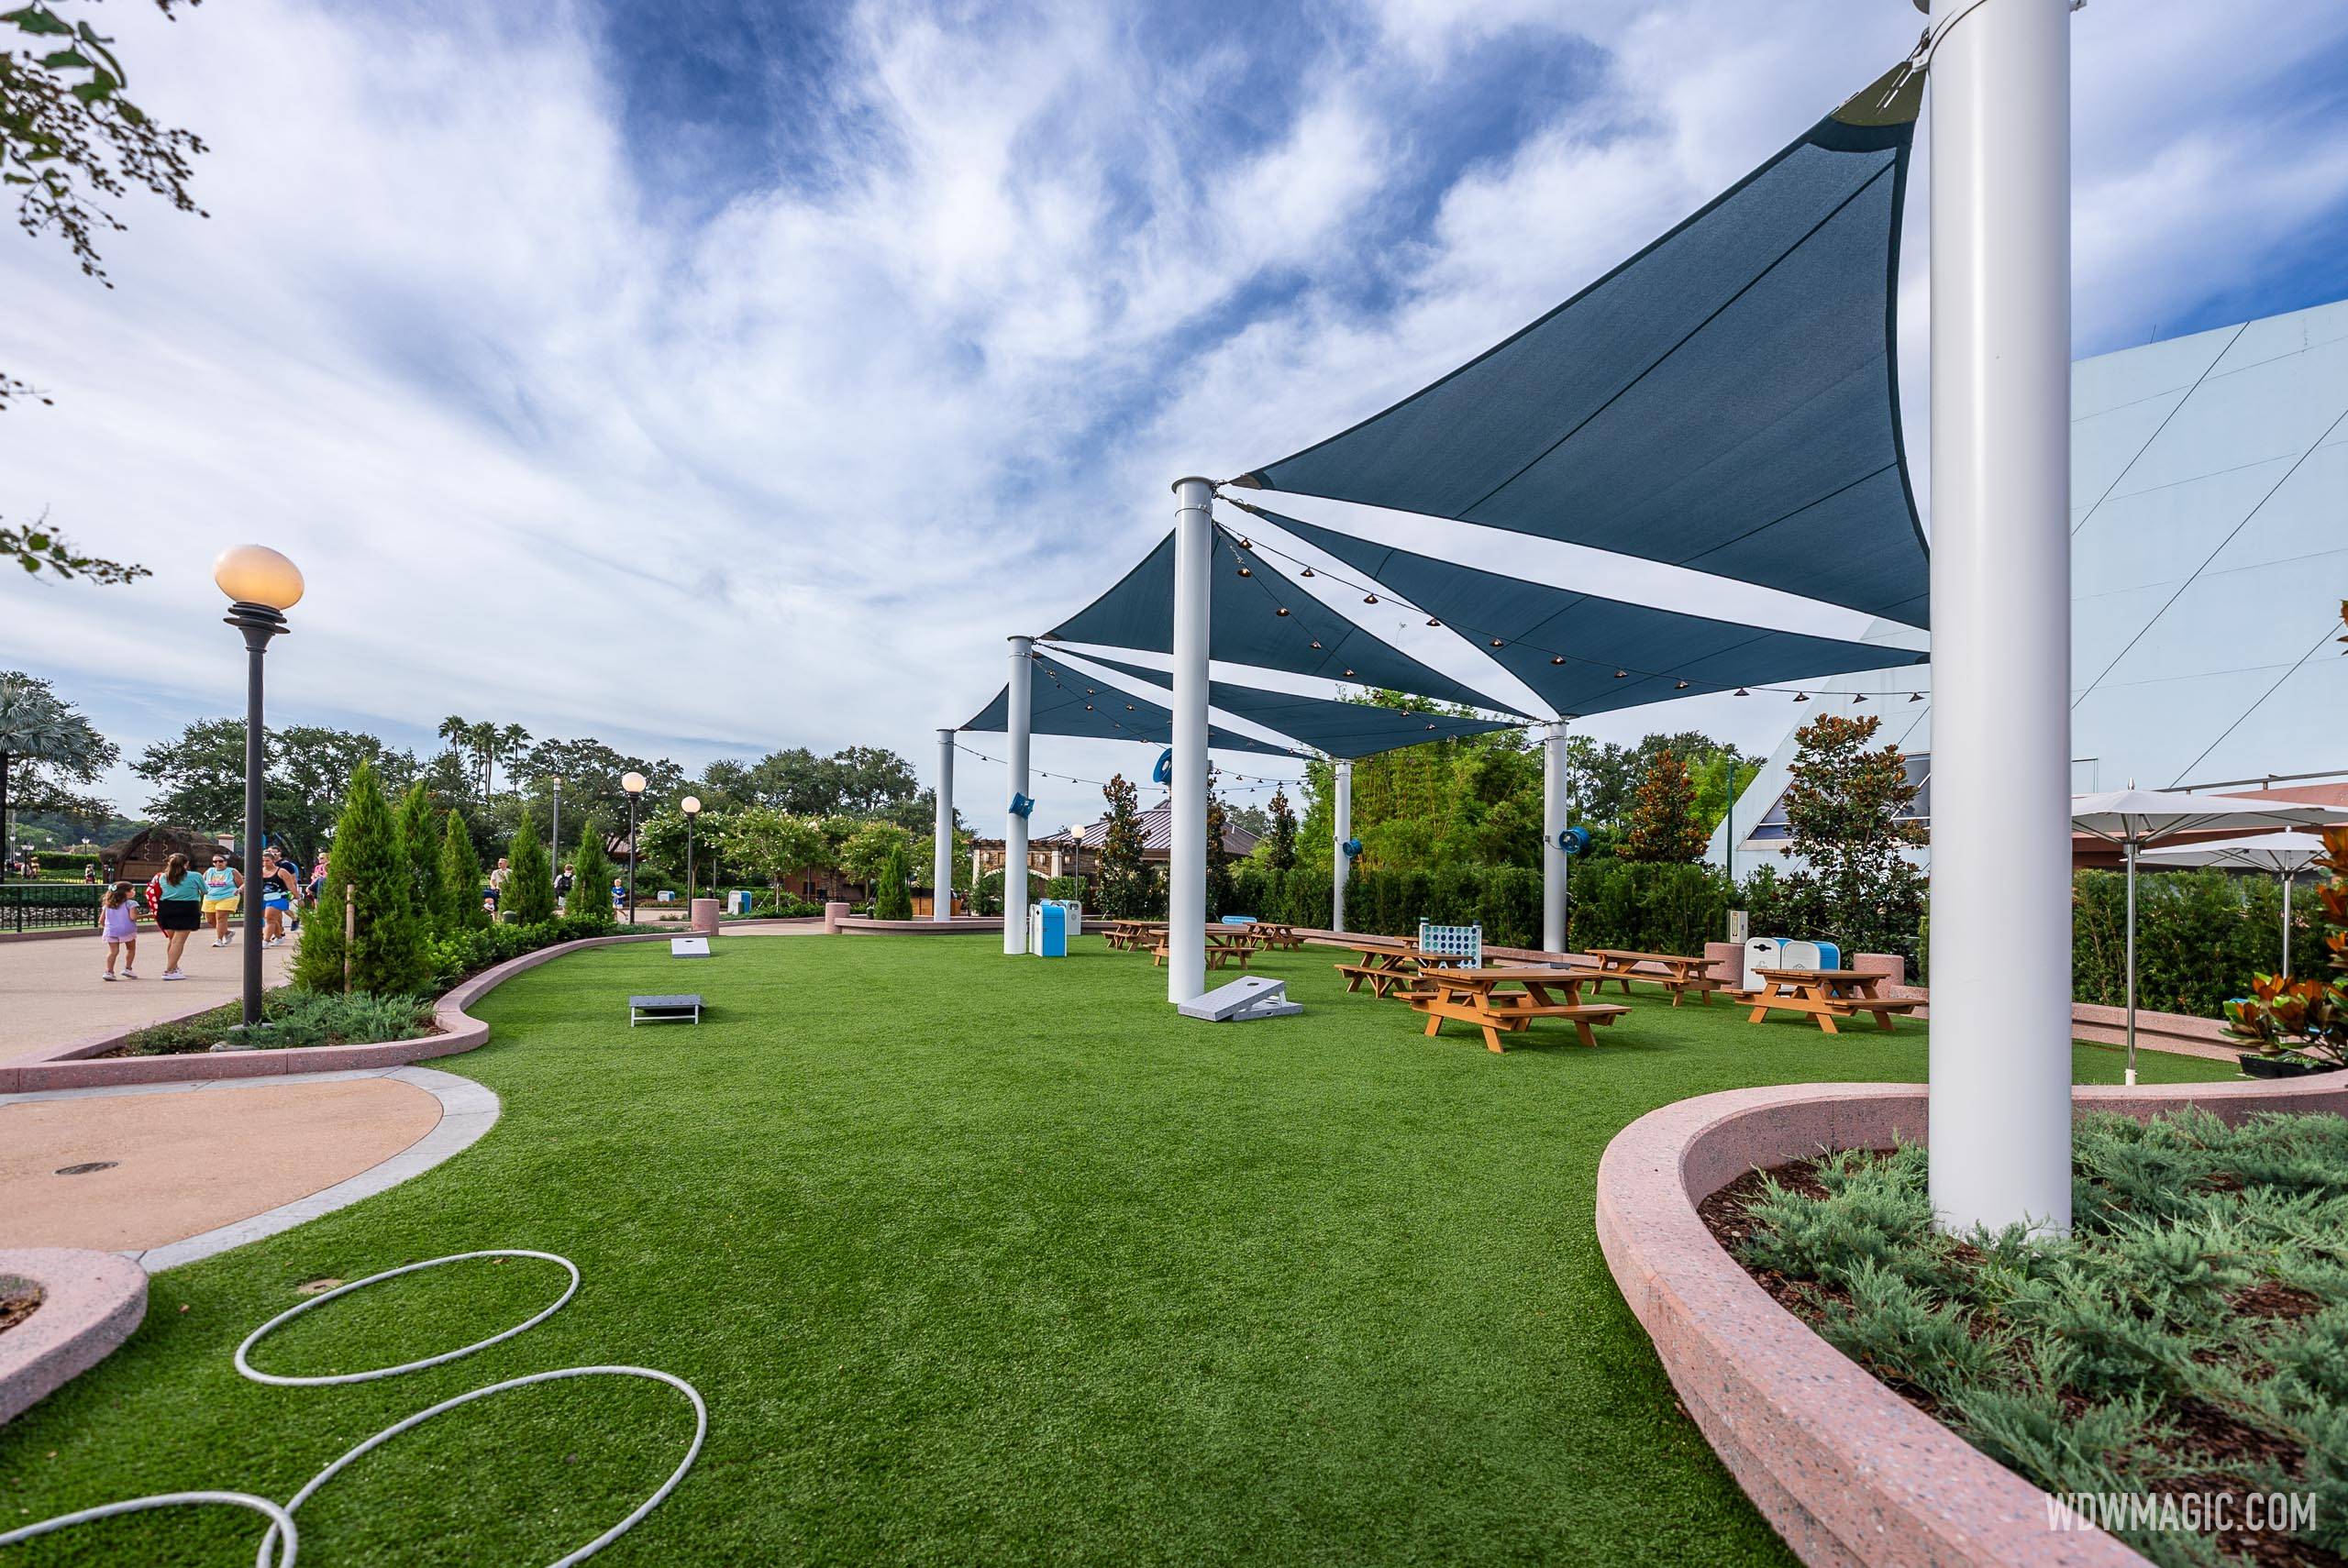 Stay Cool at EPCOT: Rose Walk Flex Space Now Has Shade Canopy